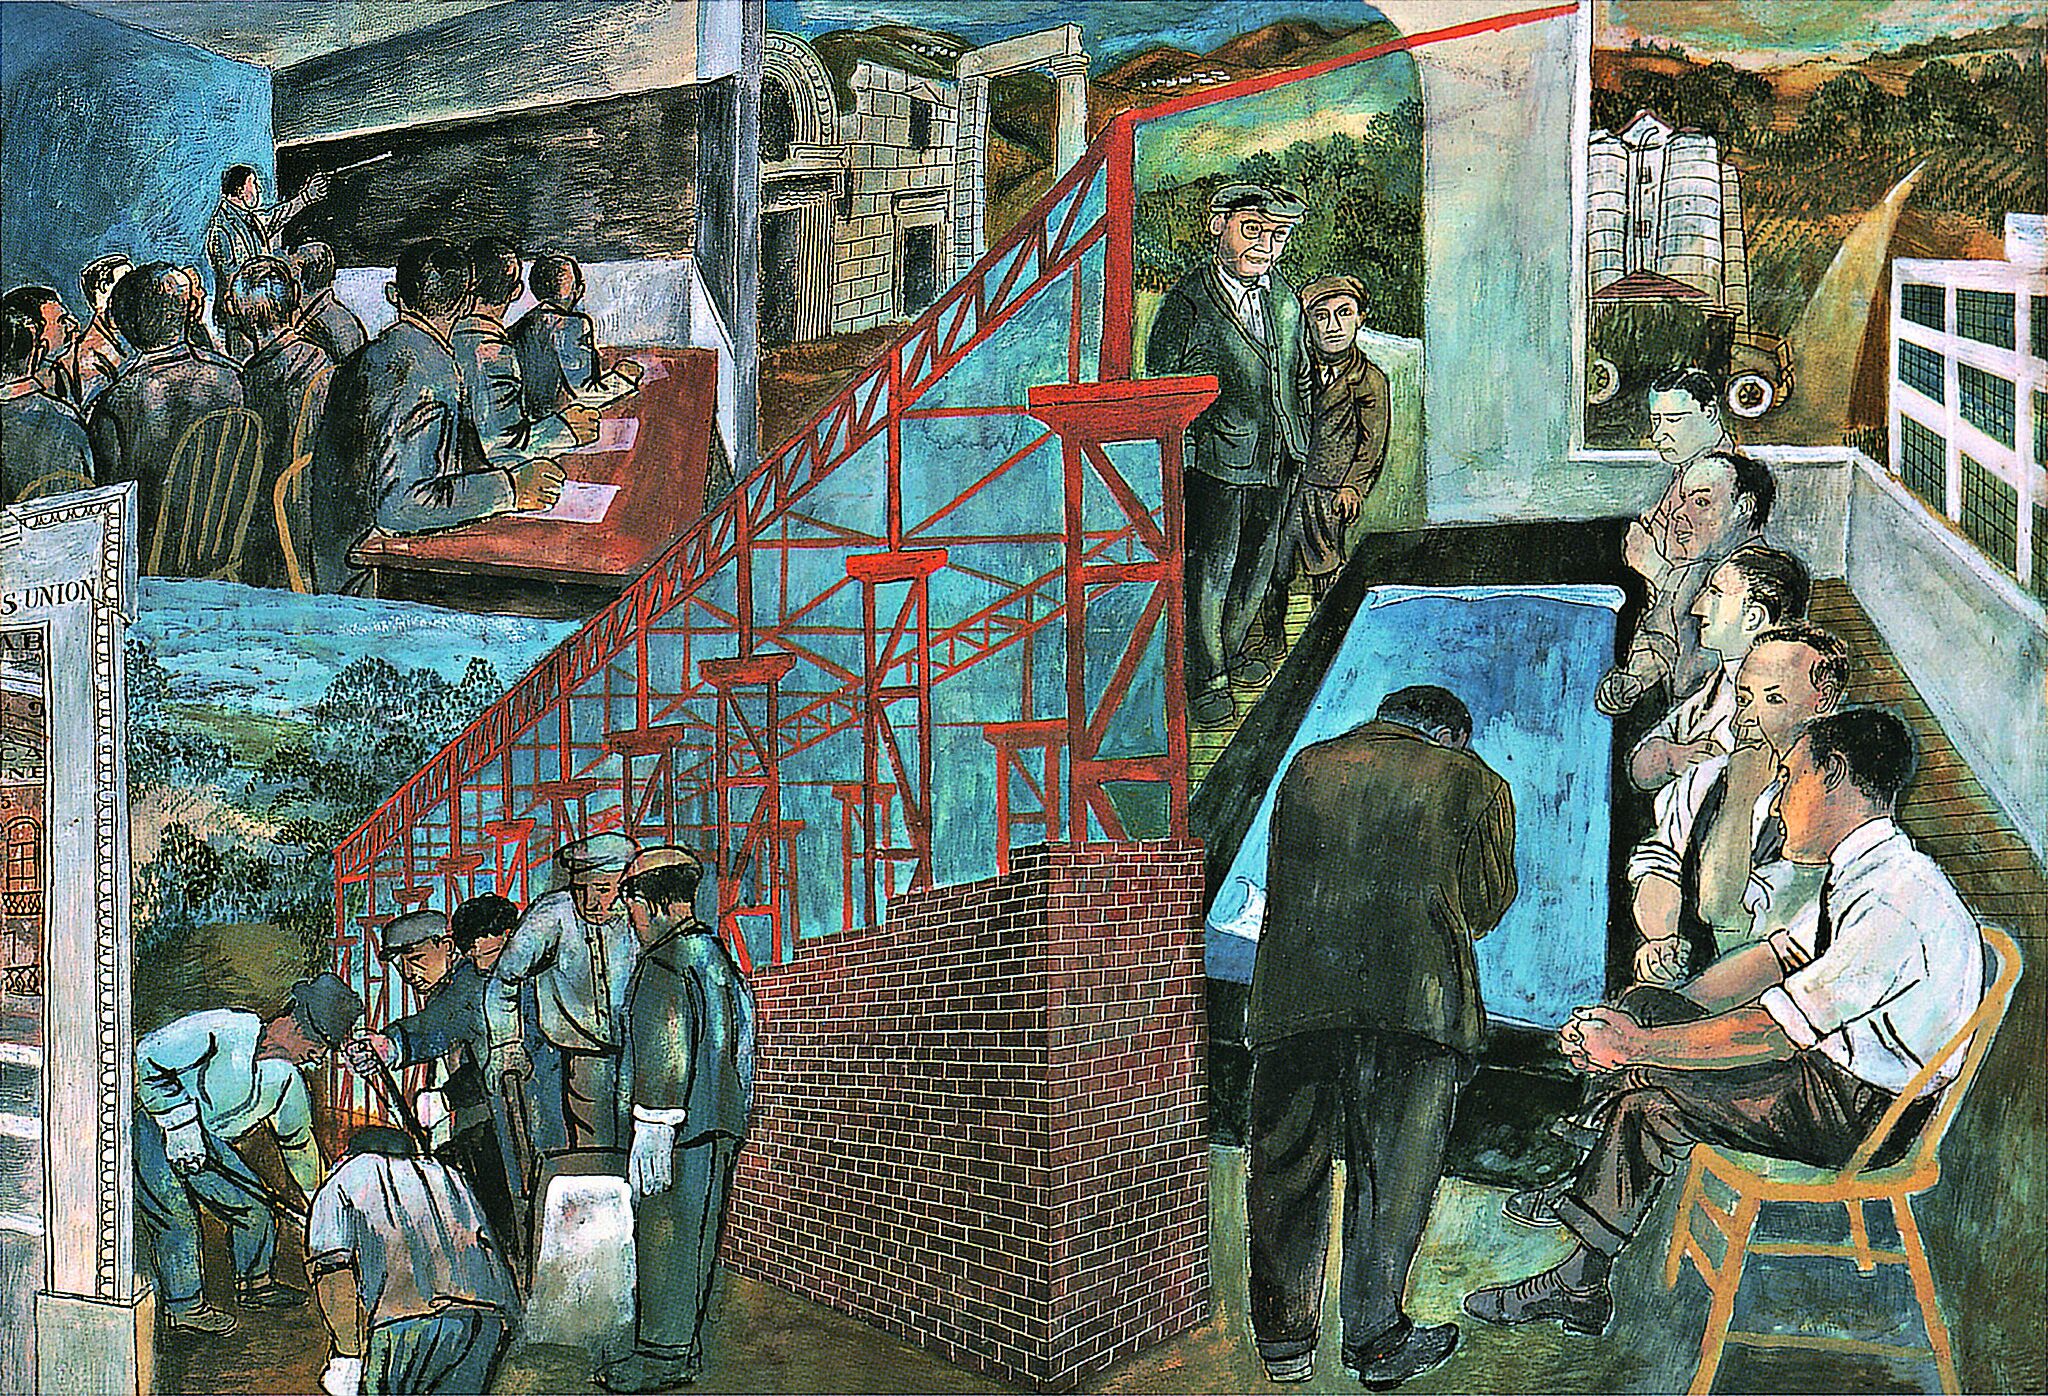 A painting study depicting different scenes including a classroom and men shoveling.